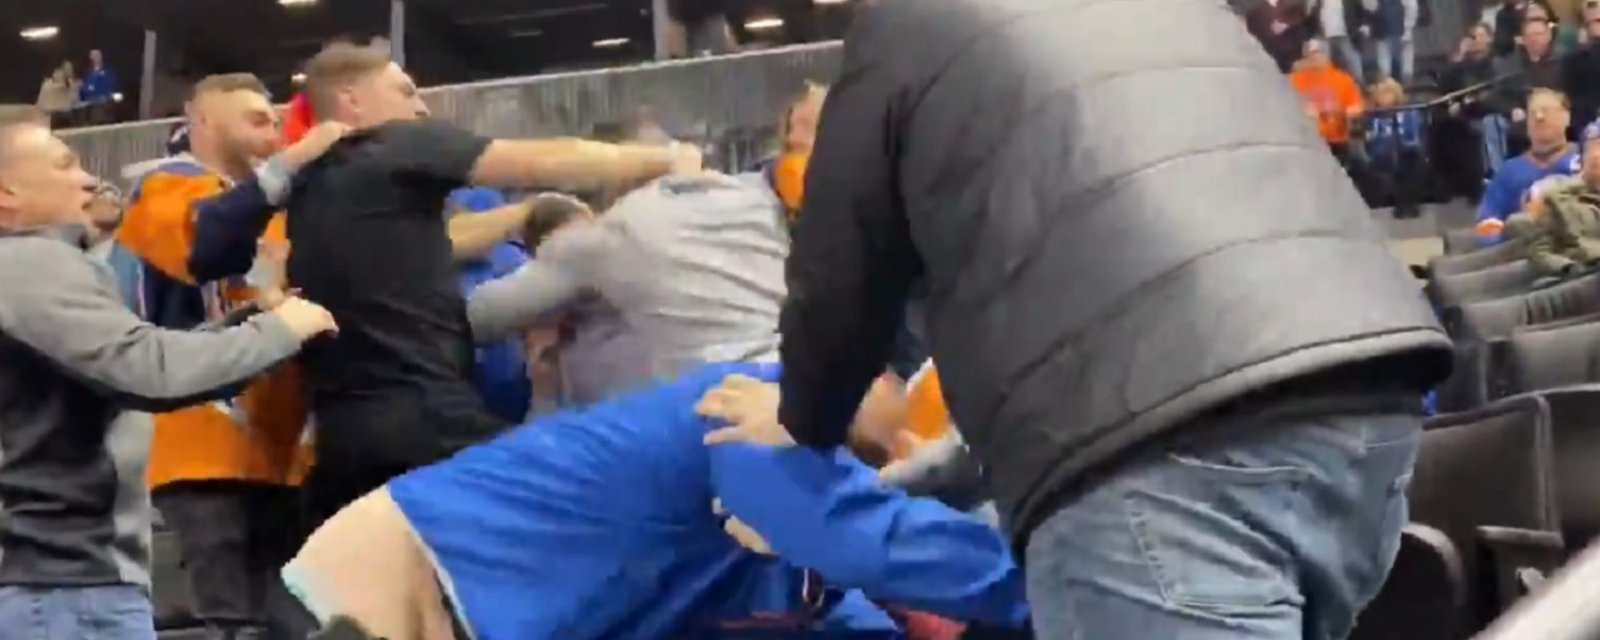 Brawl breaks out in the crowd at NHL game.